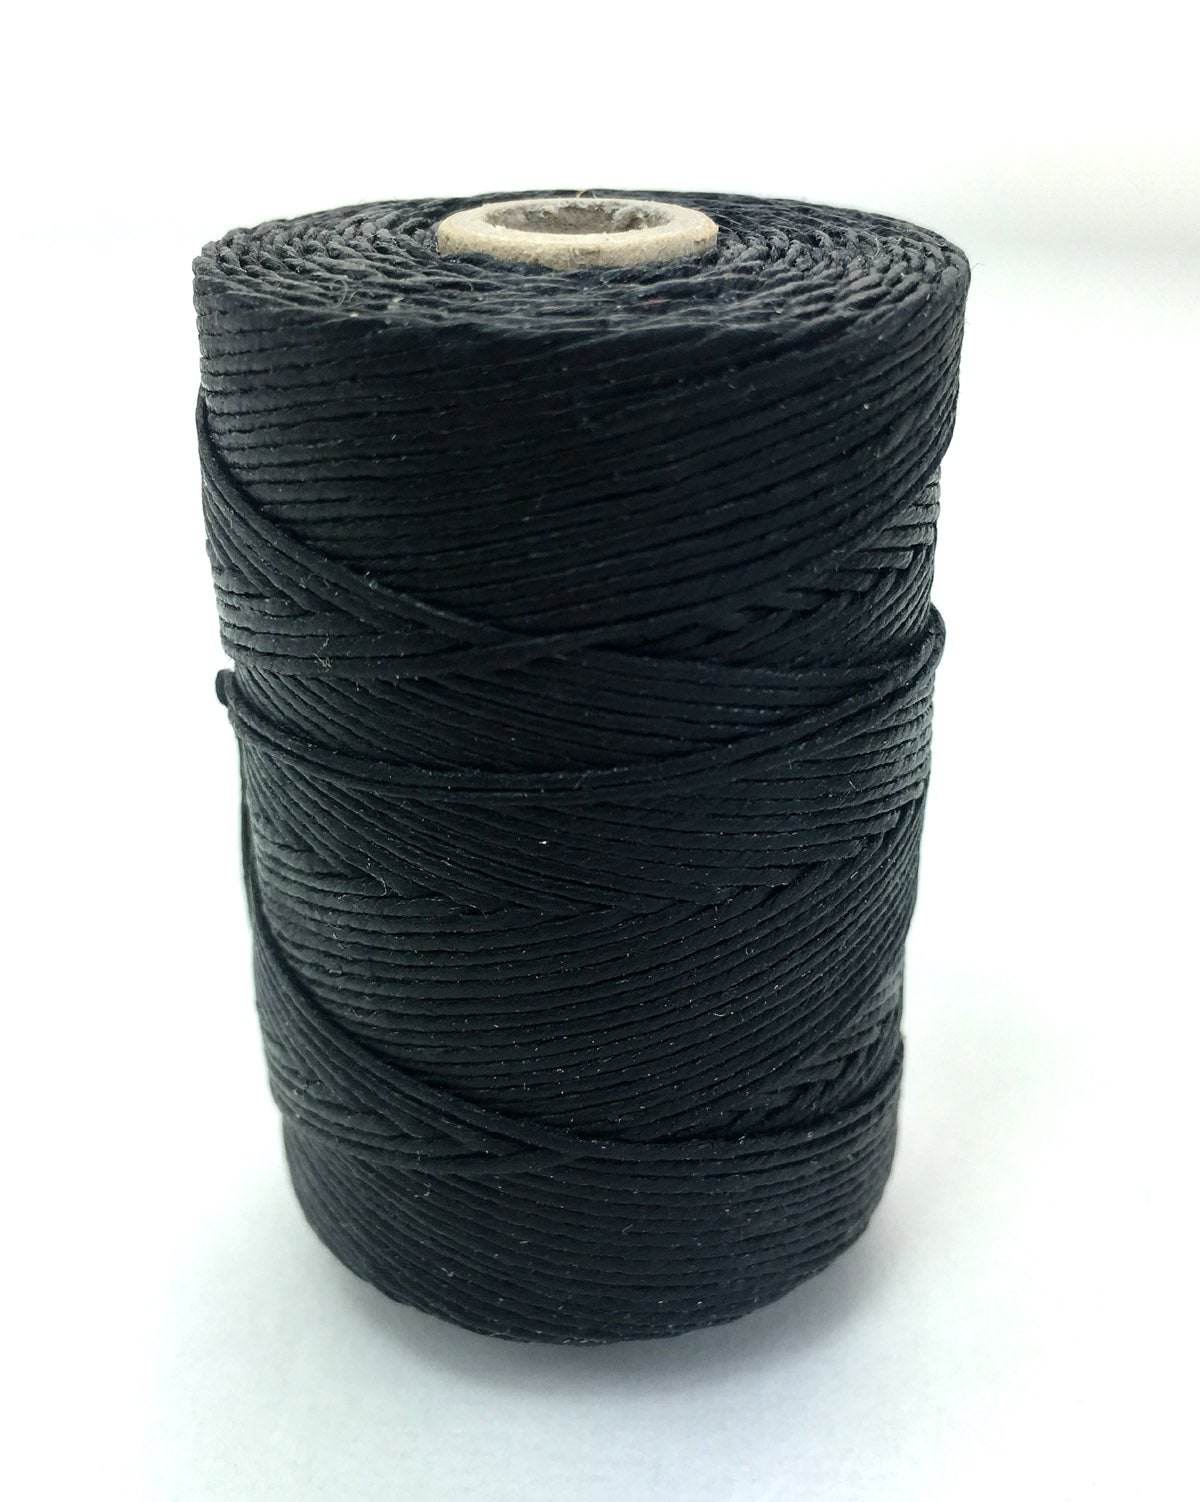 Black- Per spool 50g- 100% Pure Linen Thread- Waxed- 18/4 No.18 Cord 4- Approx 1mm thick